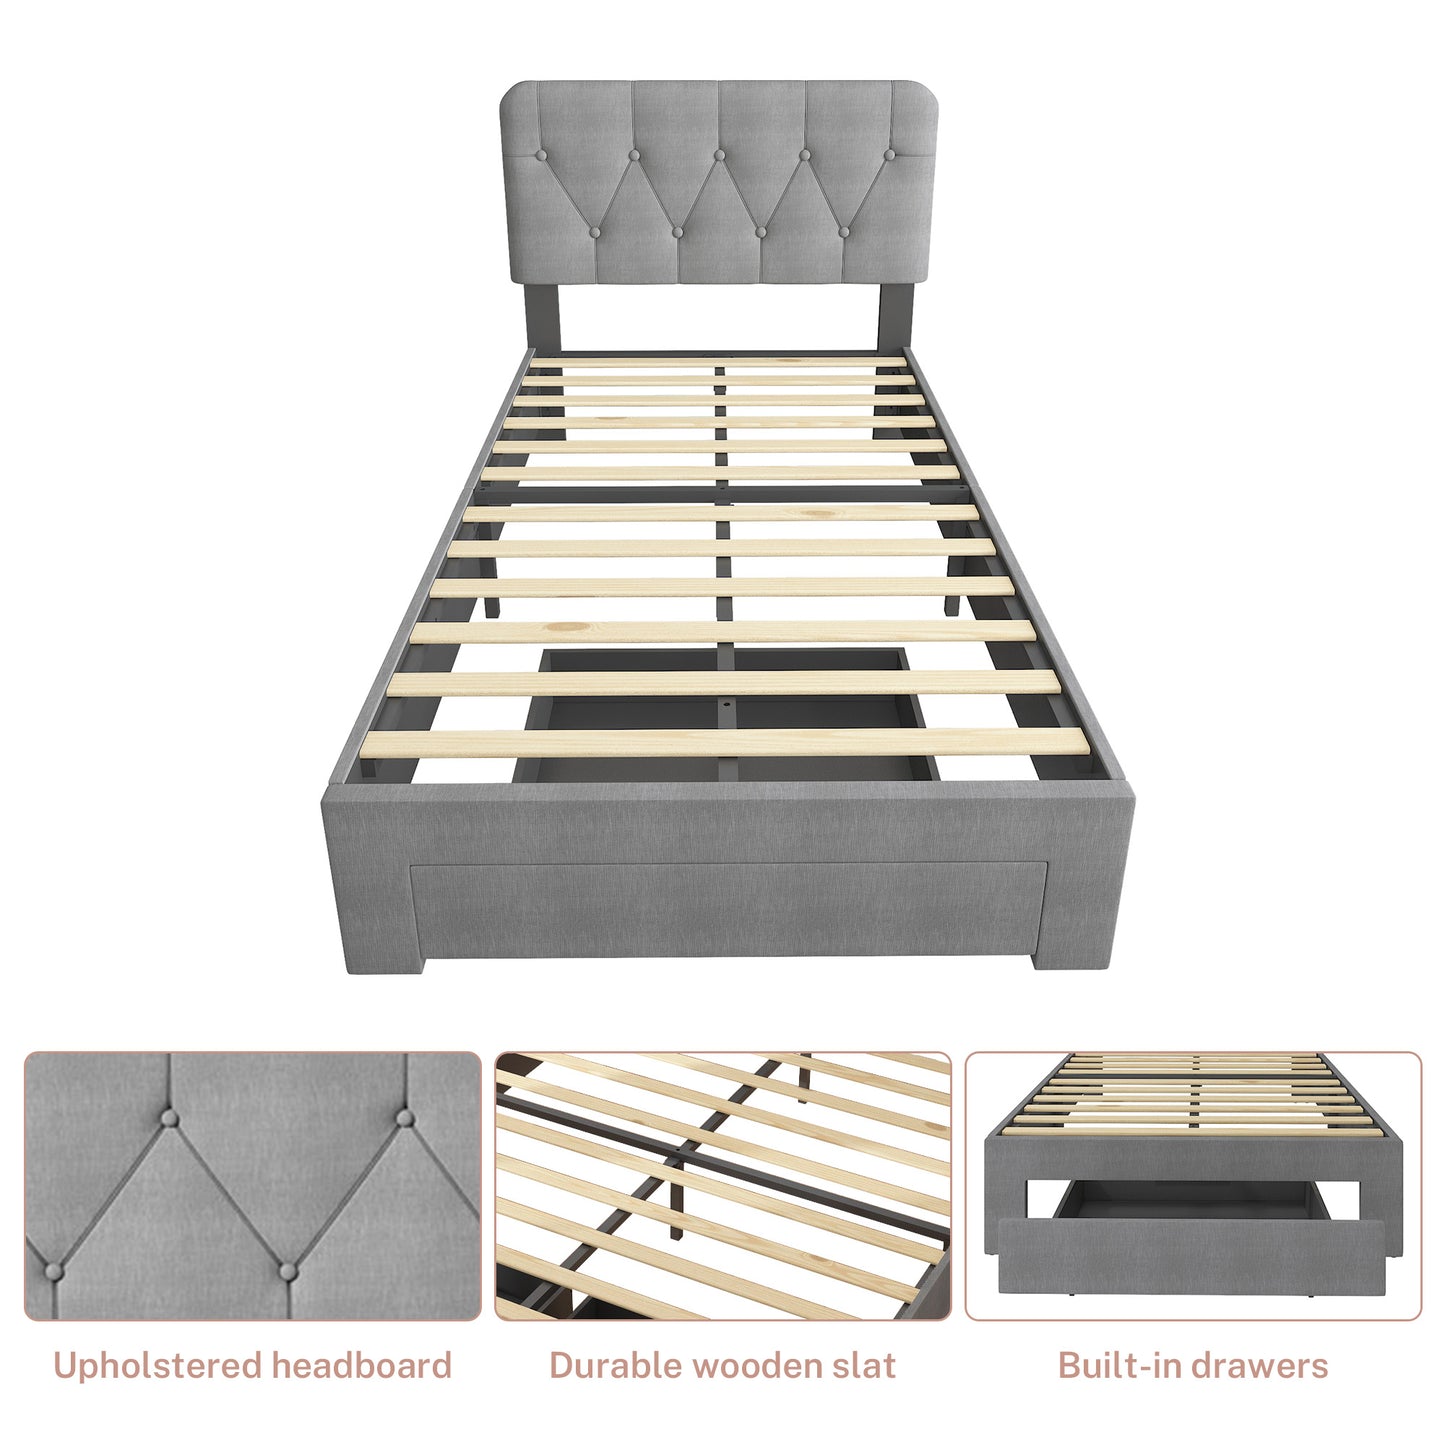 BTMWAY Queen Storage Bed Frame with Drawers, No Box Spring Needed